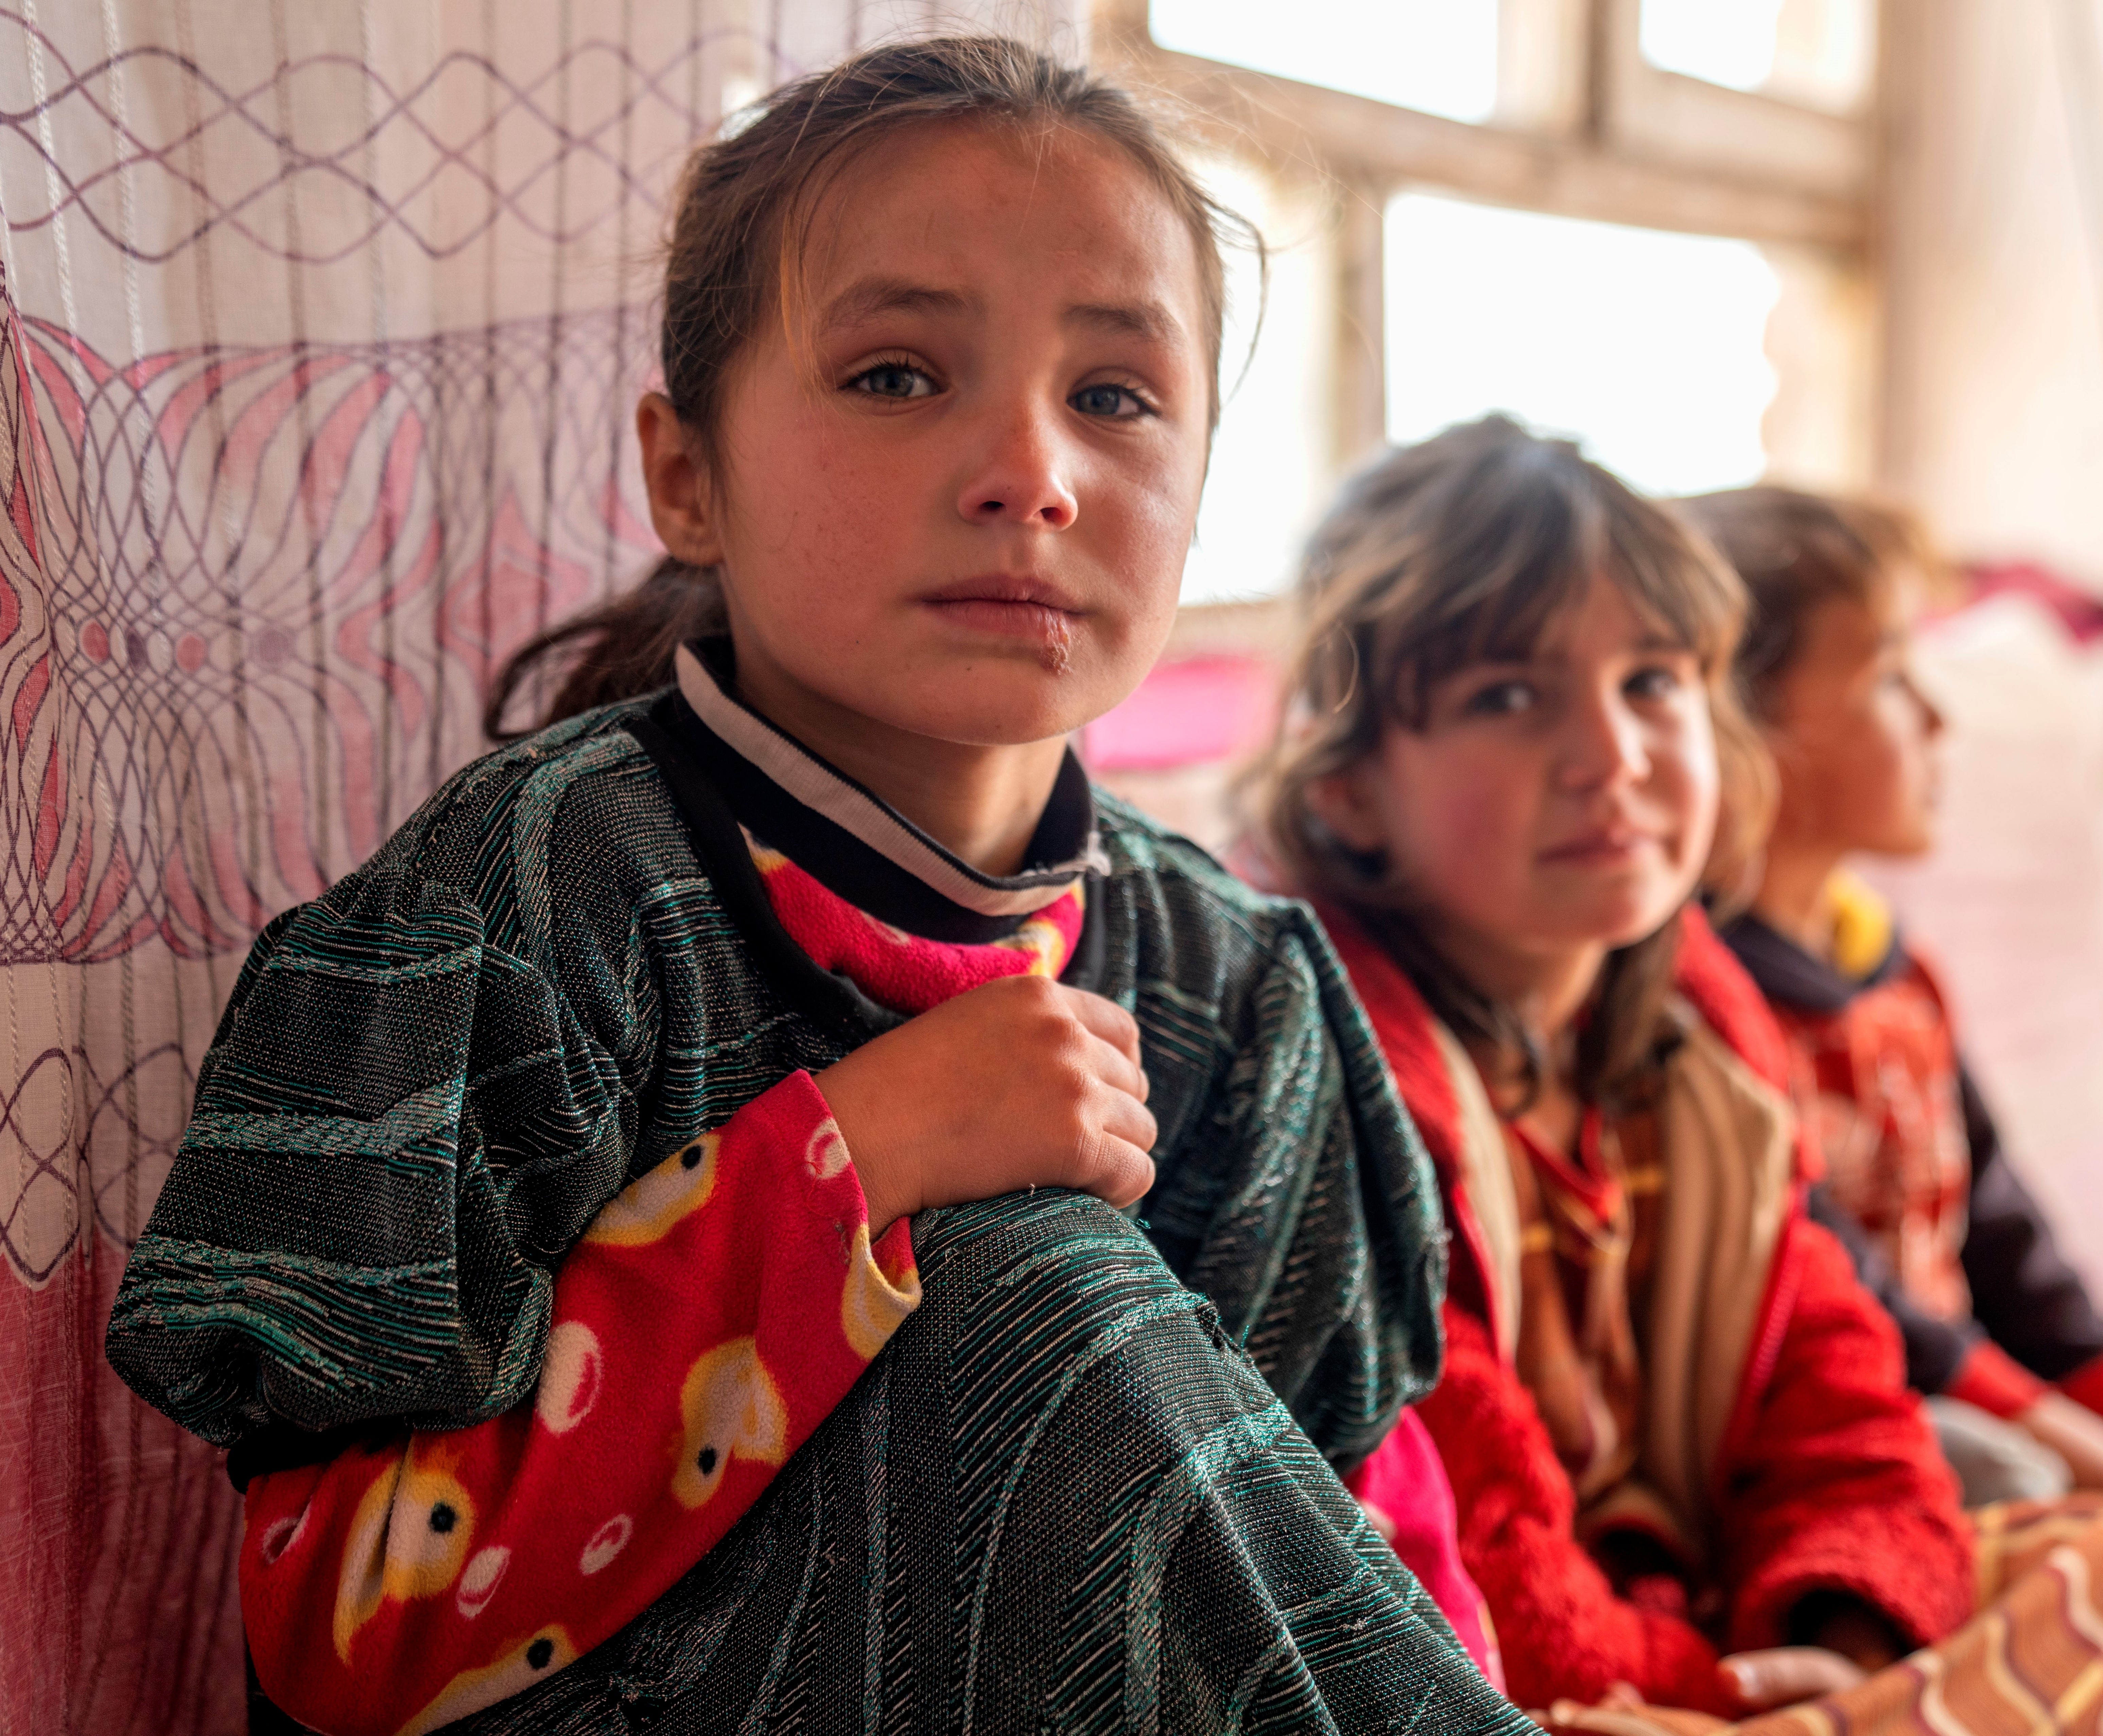 Behtar, 8, left, lives with her mother, sister, and two brothers in Lowai Baba Jan, PD11, Kabul, Afghanistan.